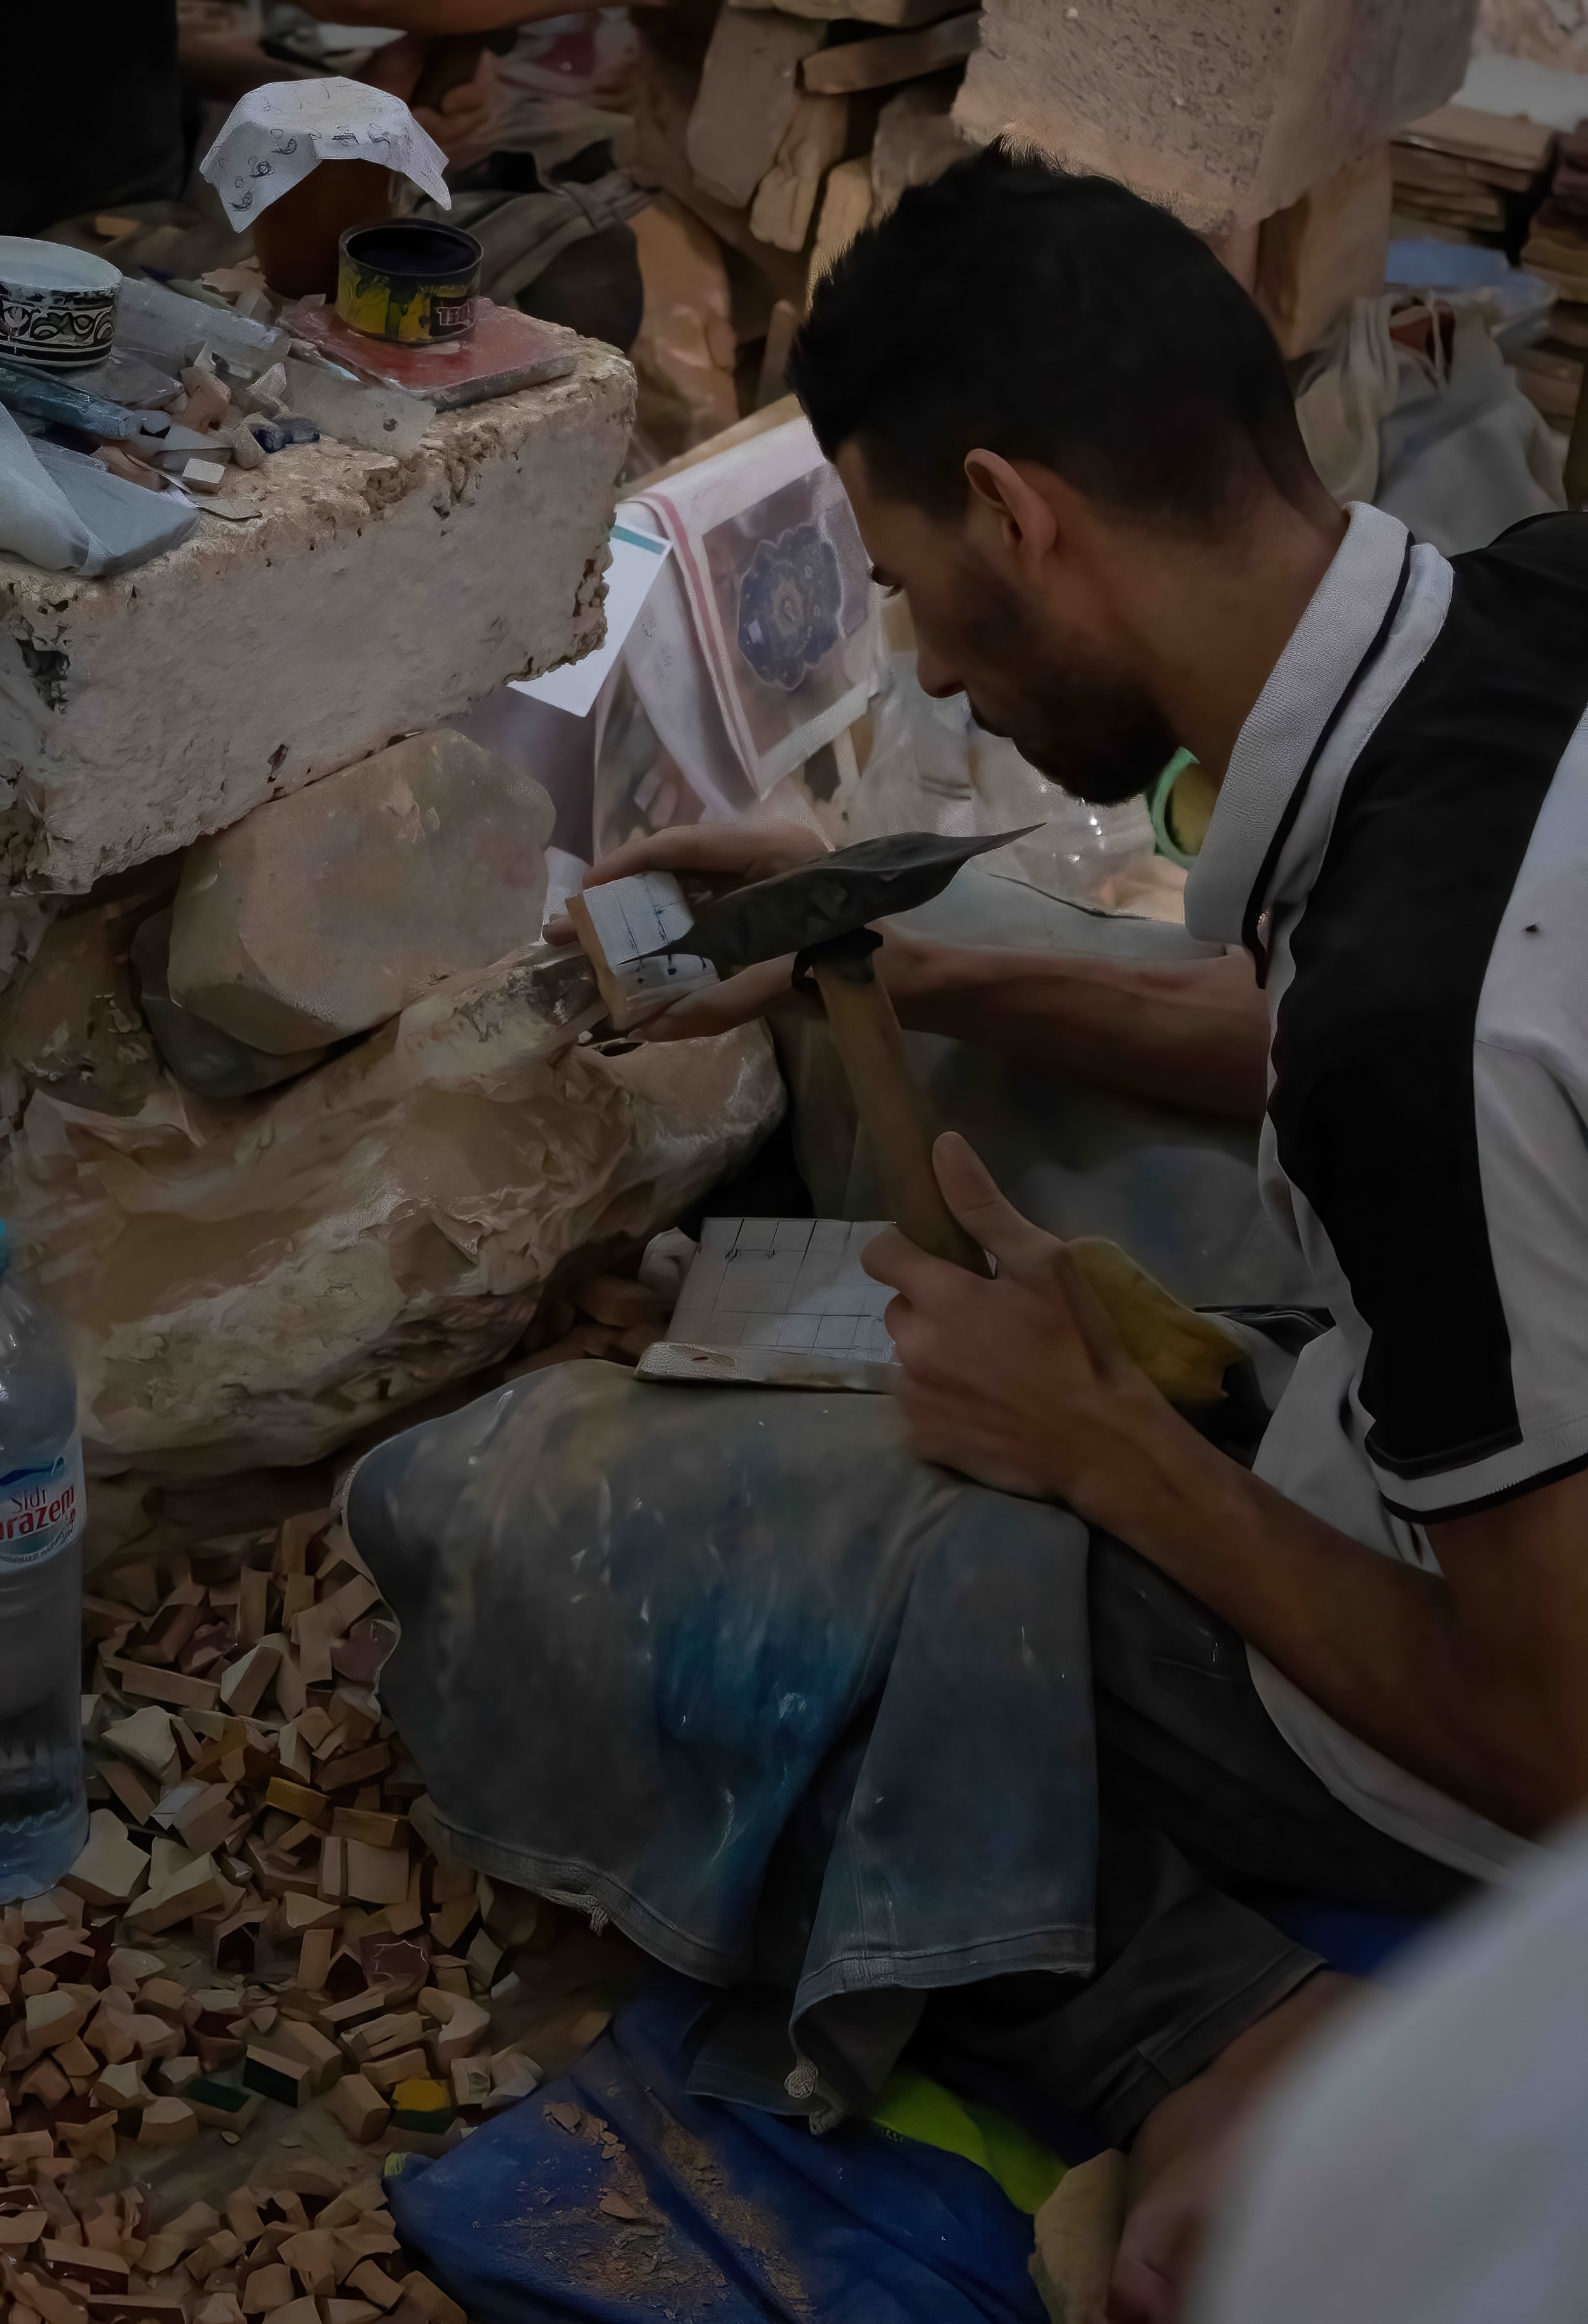 A tile worker sits and breaks pieces of tile apart to create mosaic pieces.